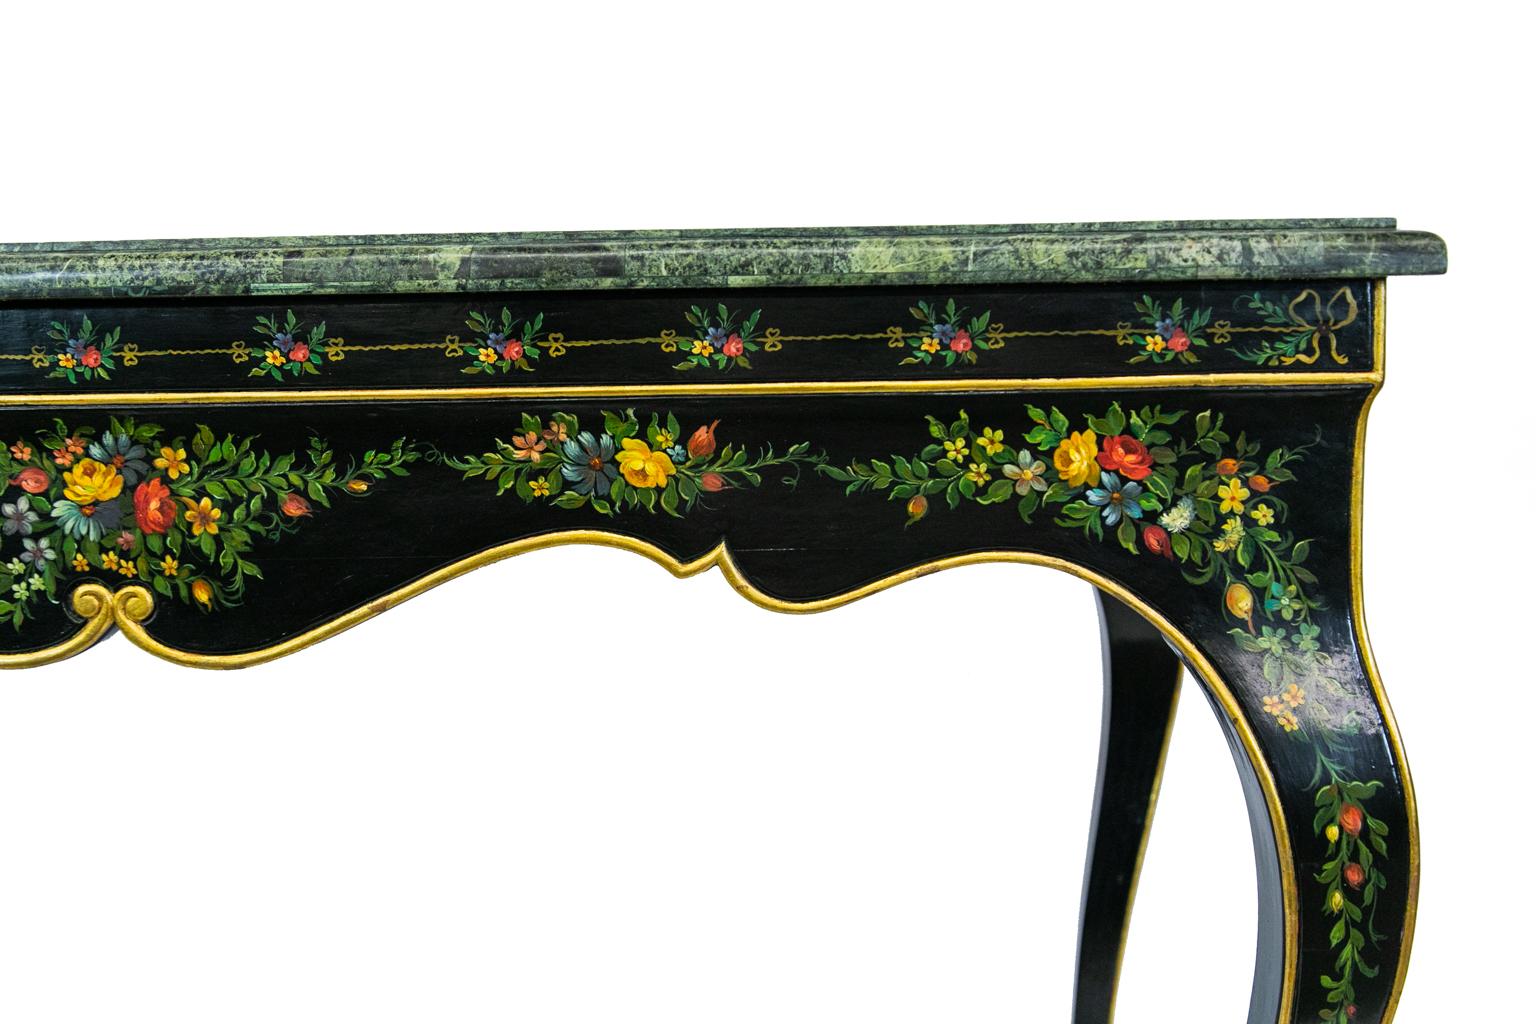 French style marble-top center table has bull nosed edge overlaid with green marble panels in various sizes which are glued together to create an interesting effect. The base is hand painted with colorful flowers and ribbons highlighted with gold